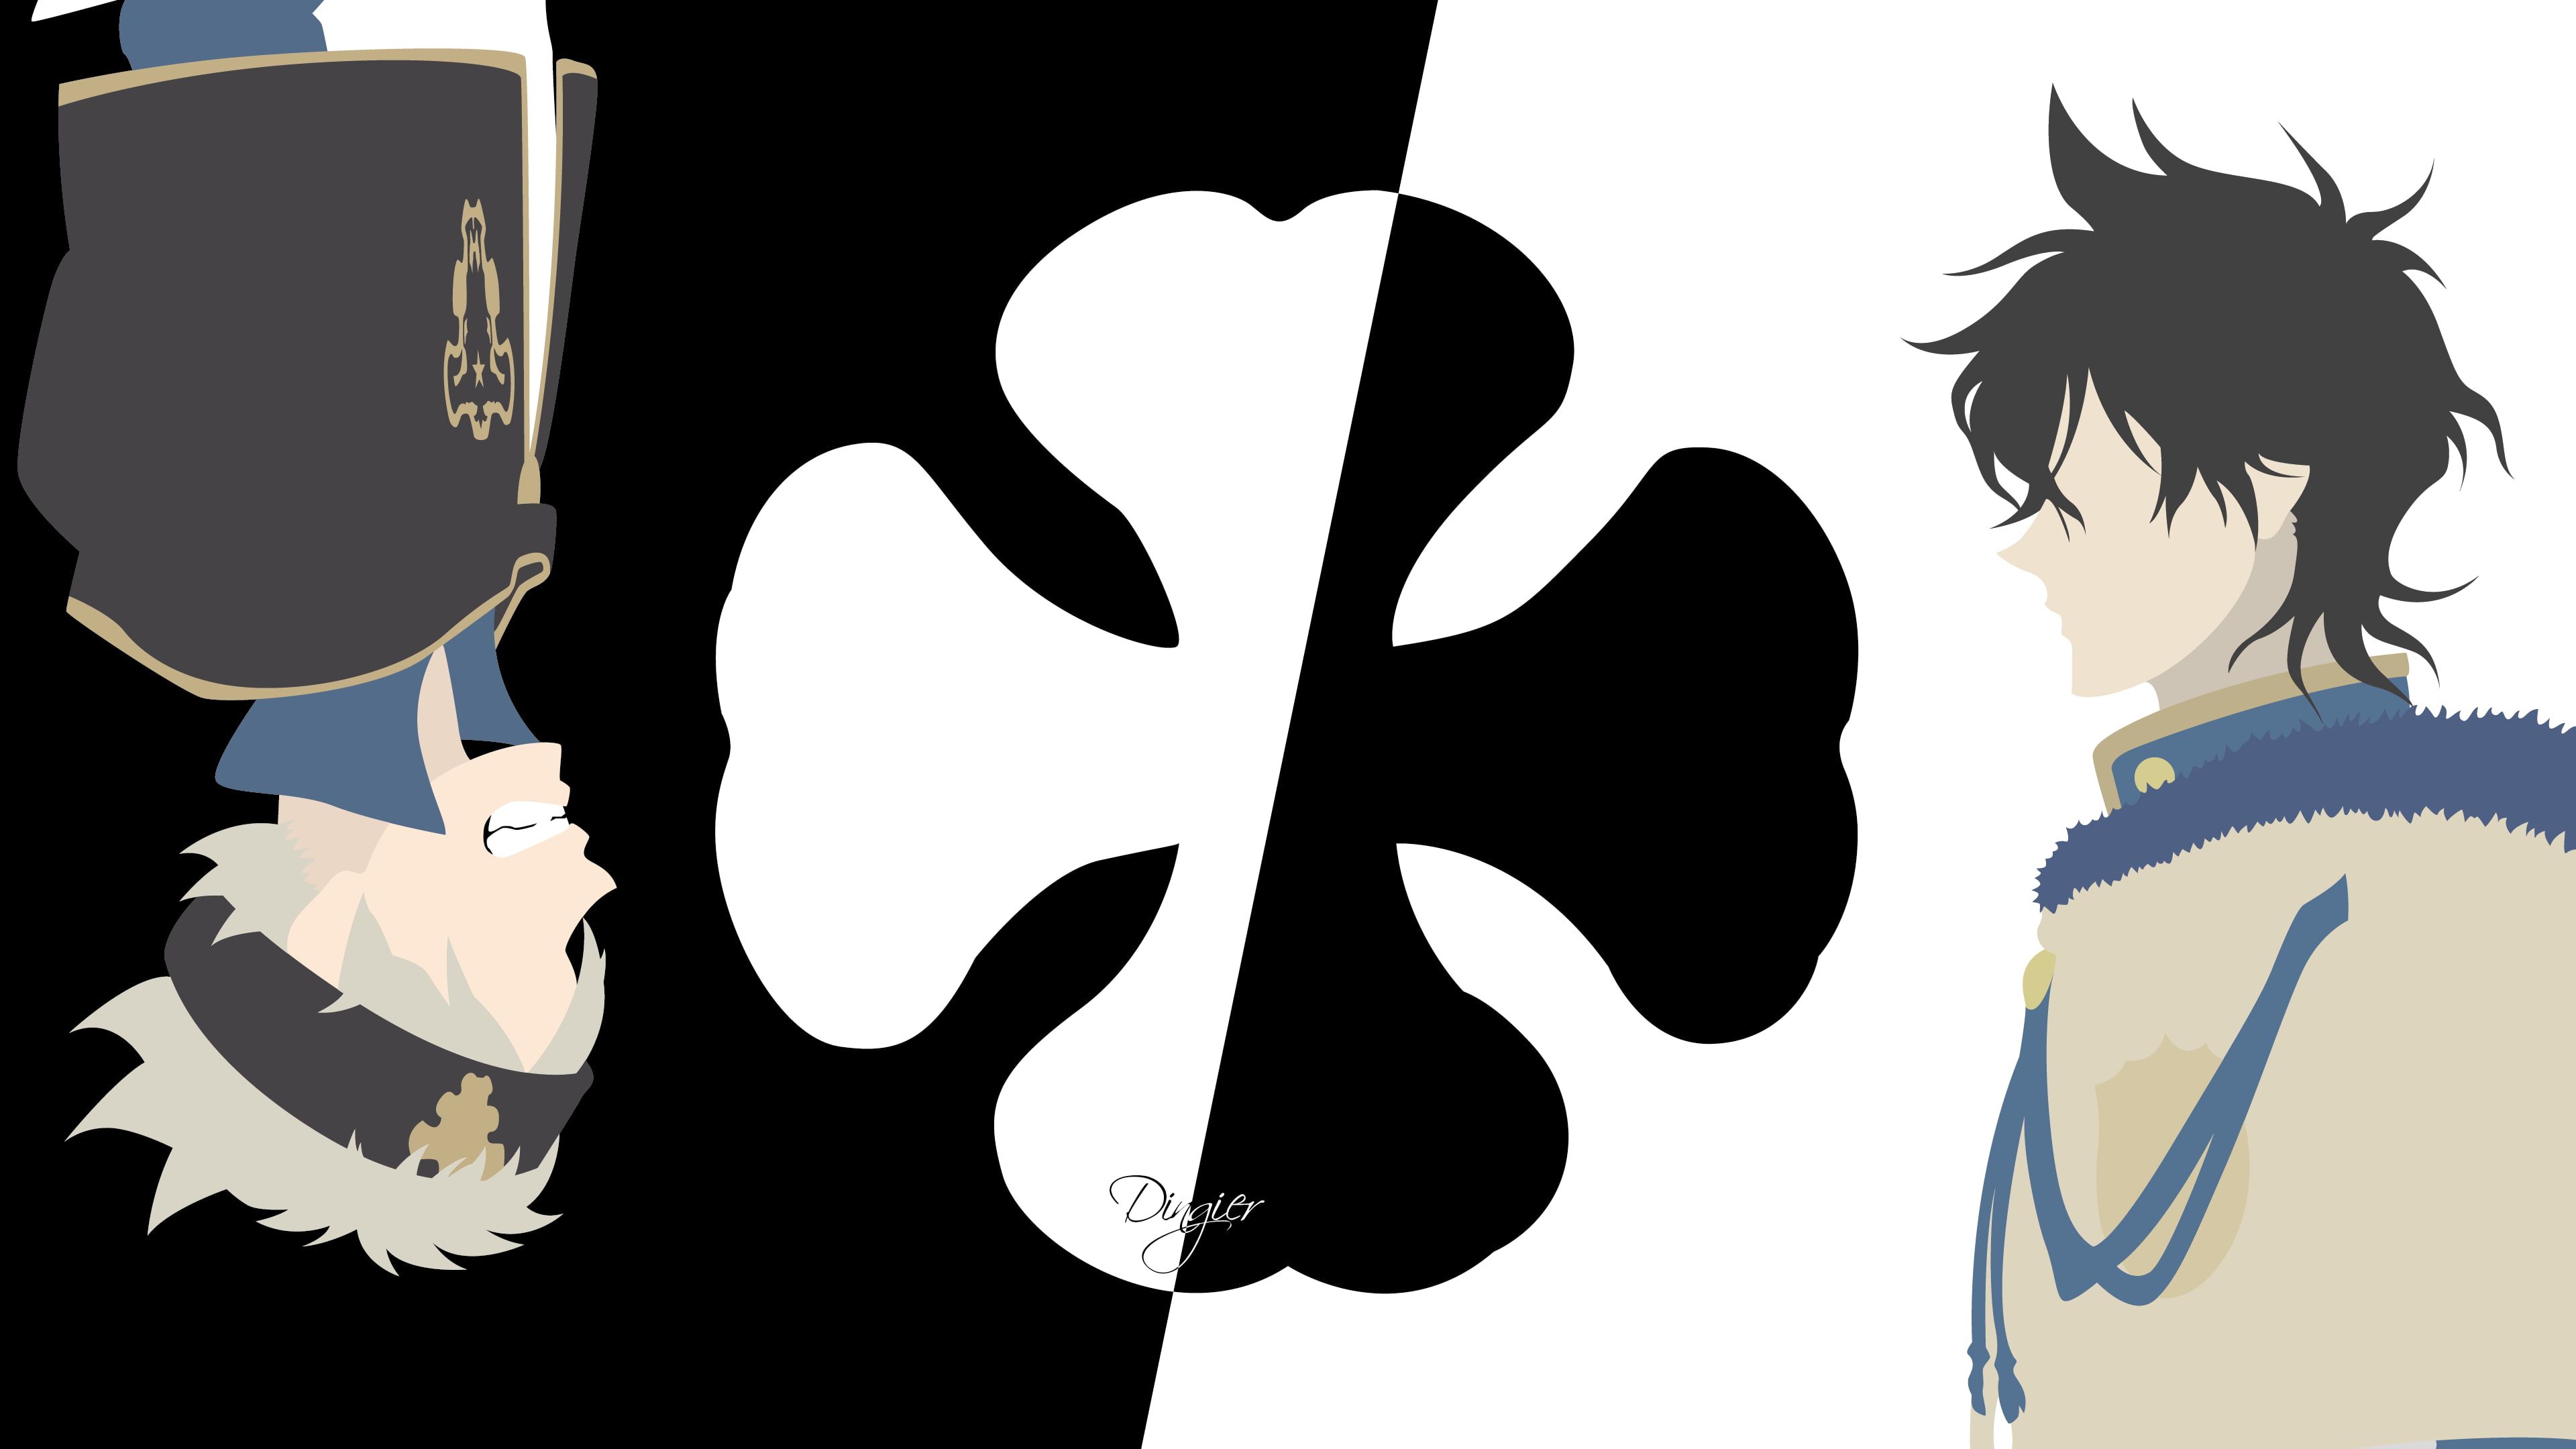 Aesthetic PC Black Clover Wallpapers - Wallpaper Cave